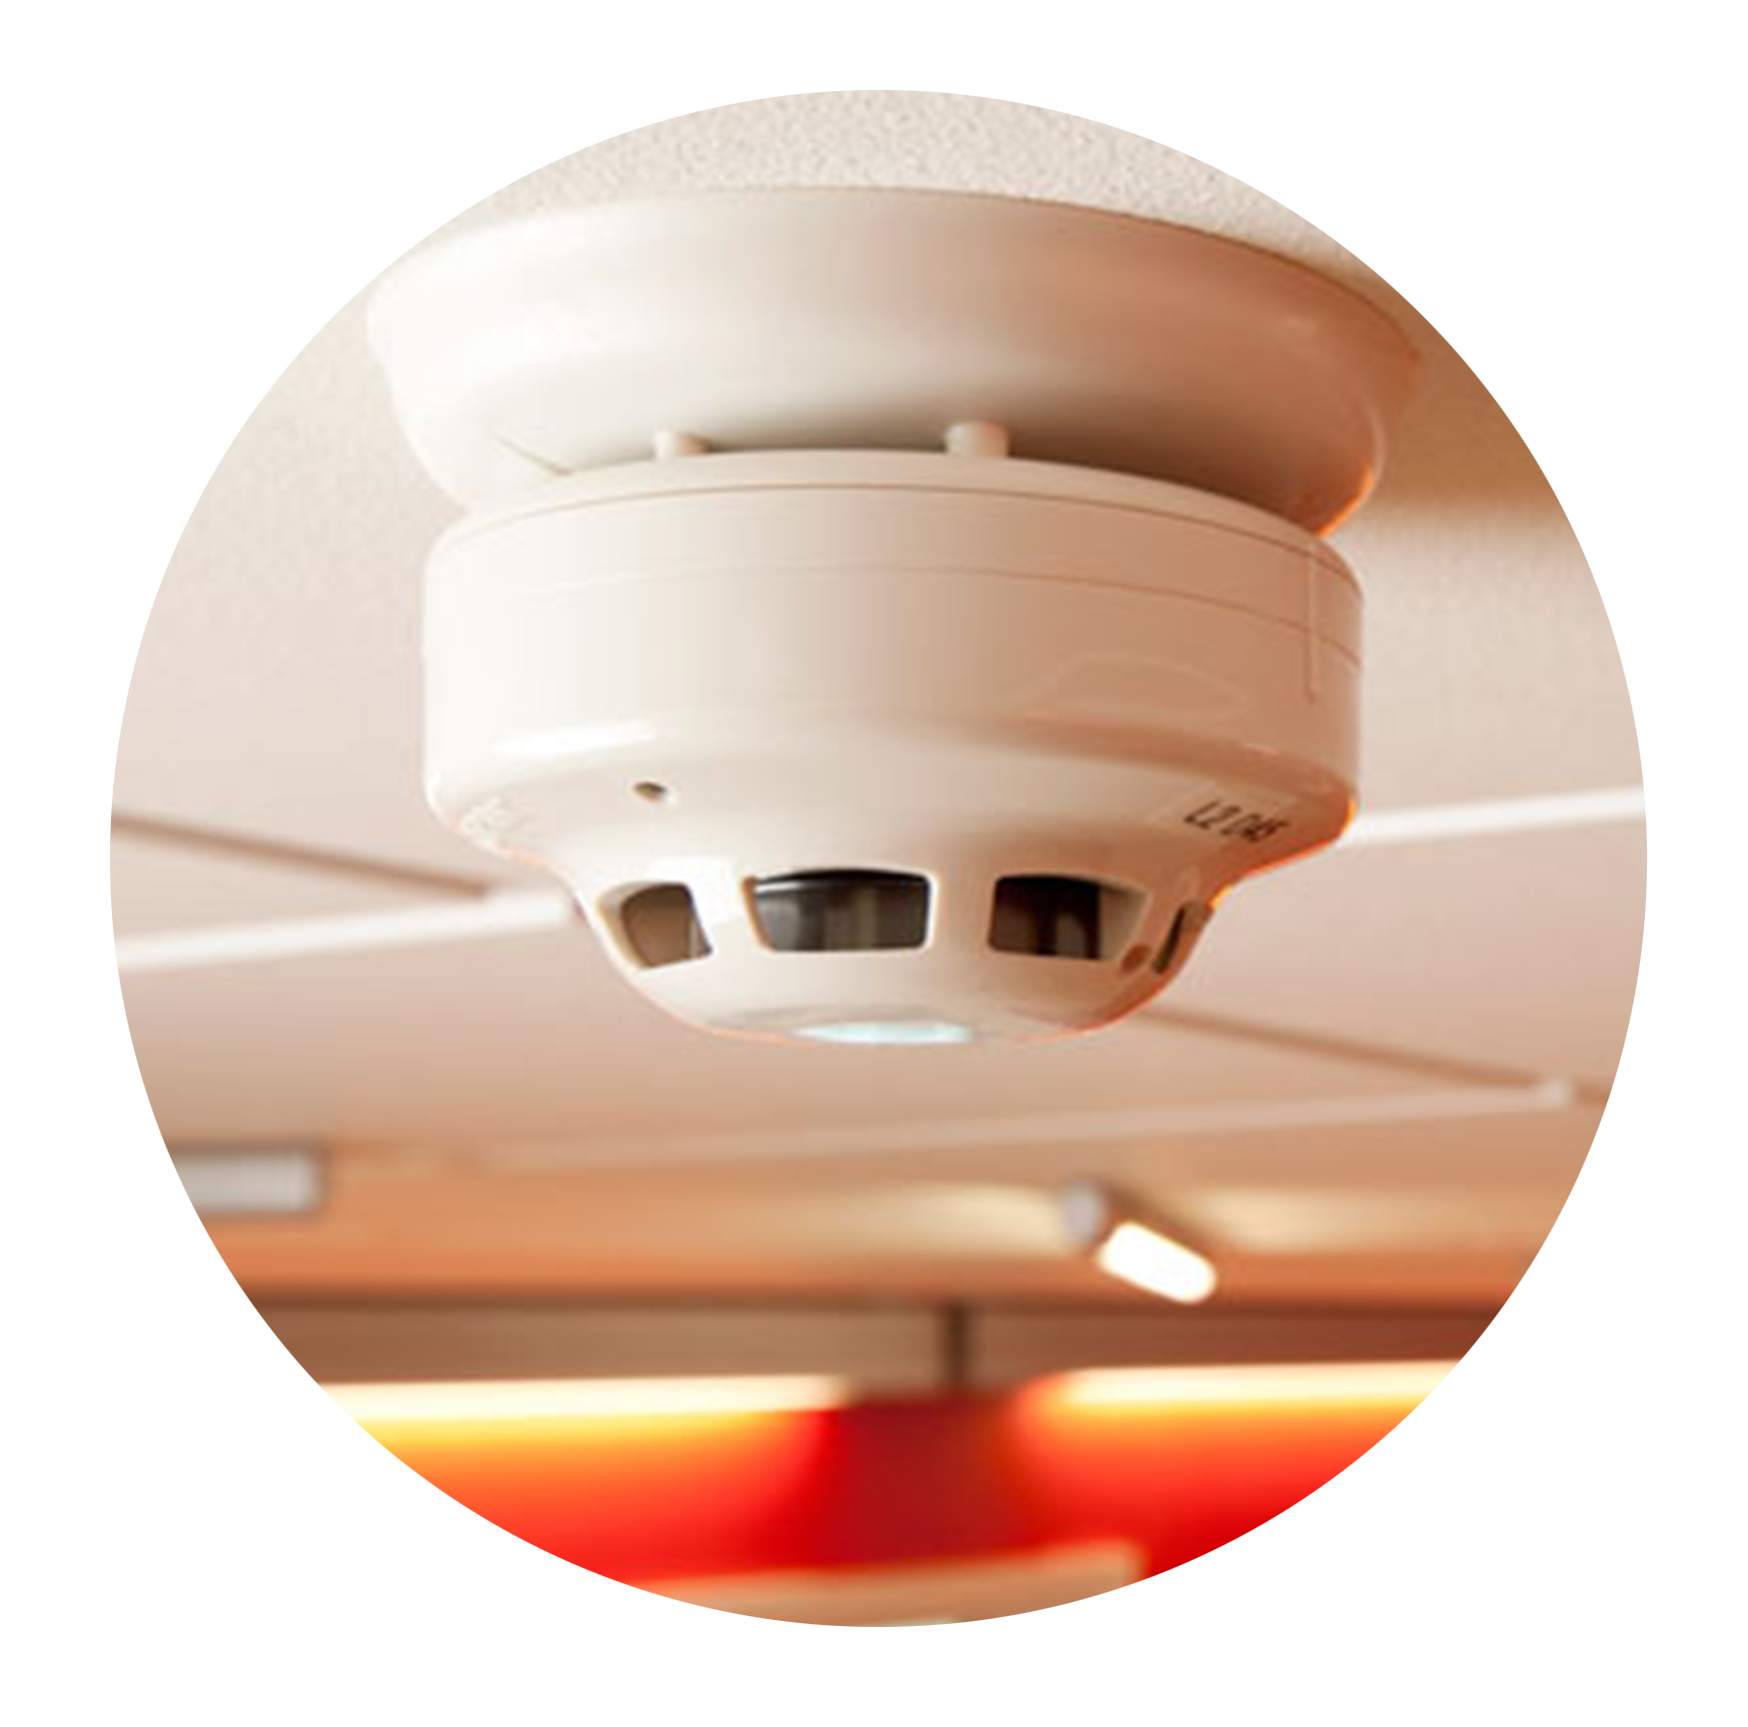 Fire Detection Systems